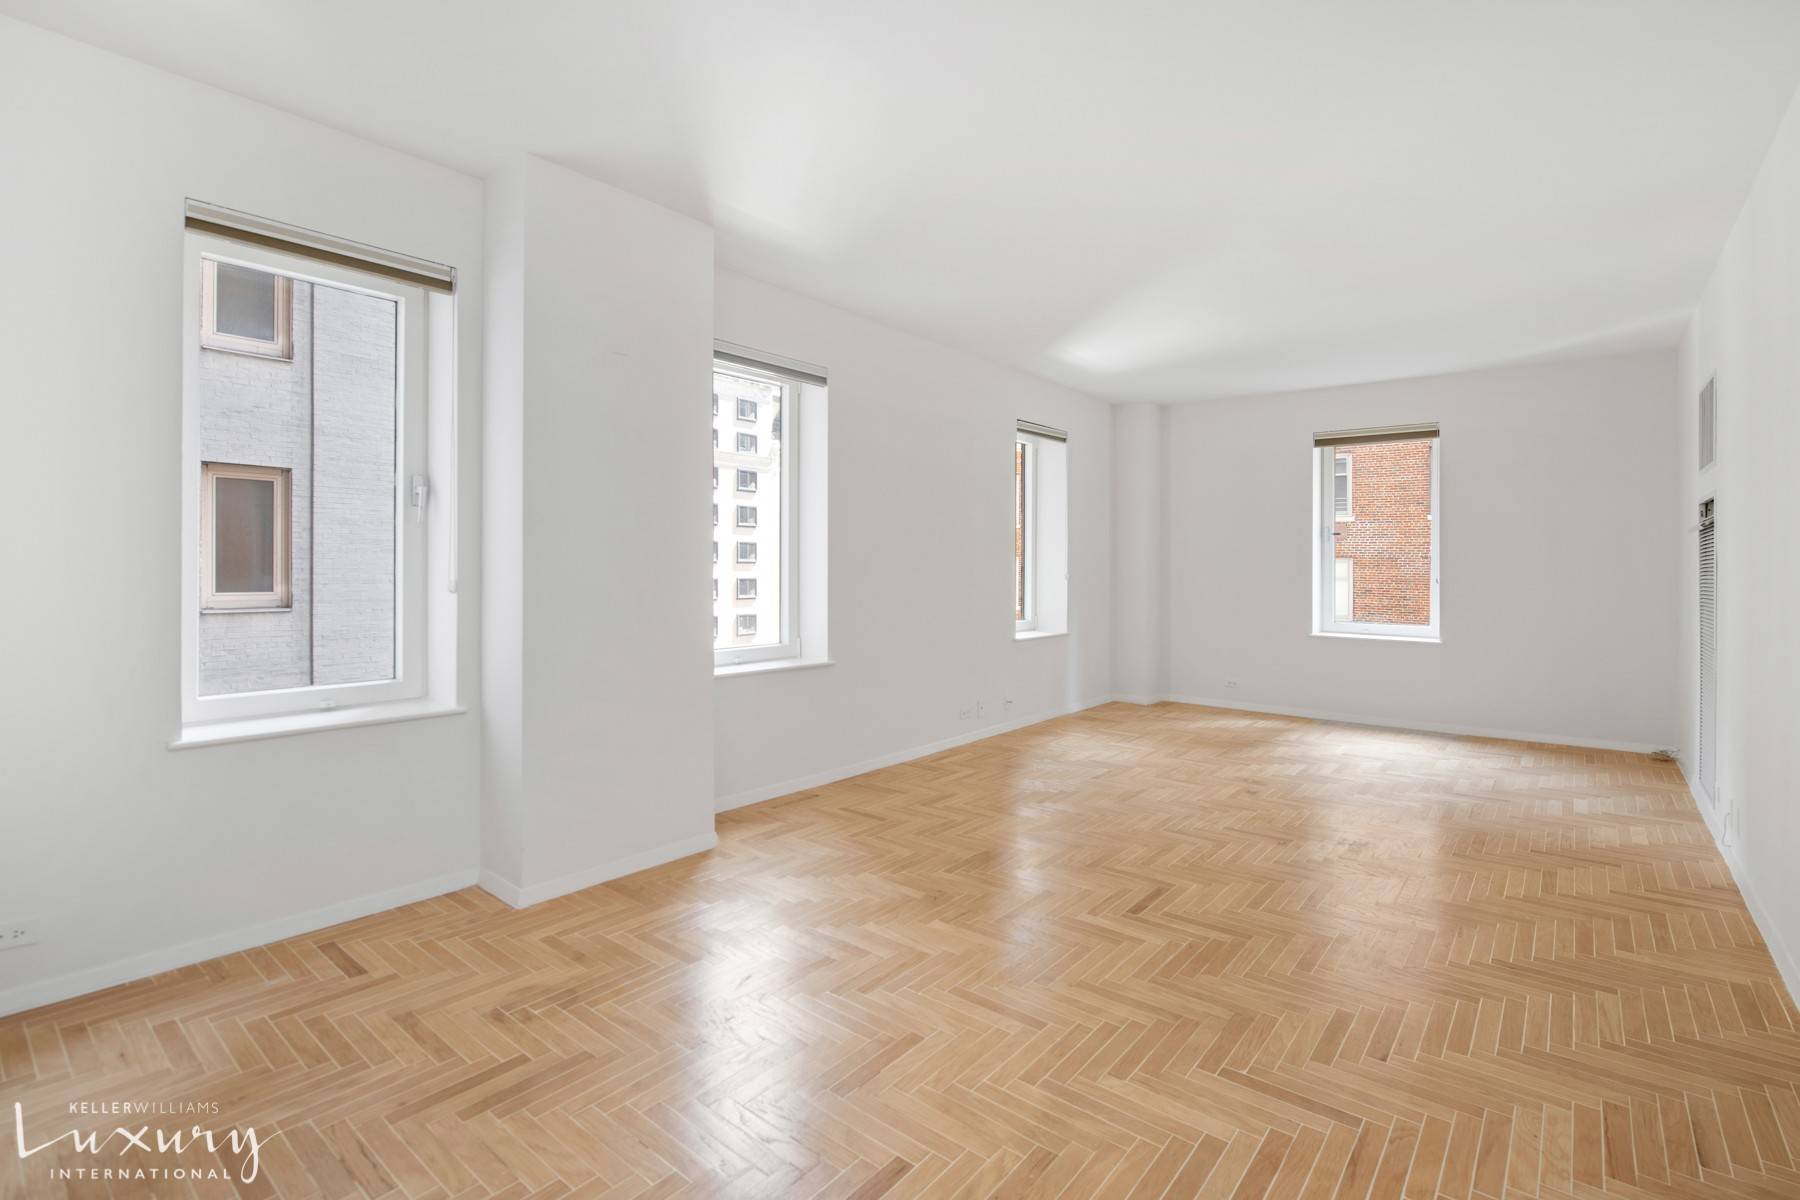 Rarely Available Do Not Miss This Loft Style Studio Convertible One Bedroom With Incredible Sunlight on Central Park South !